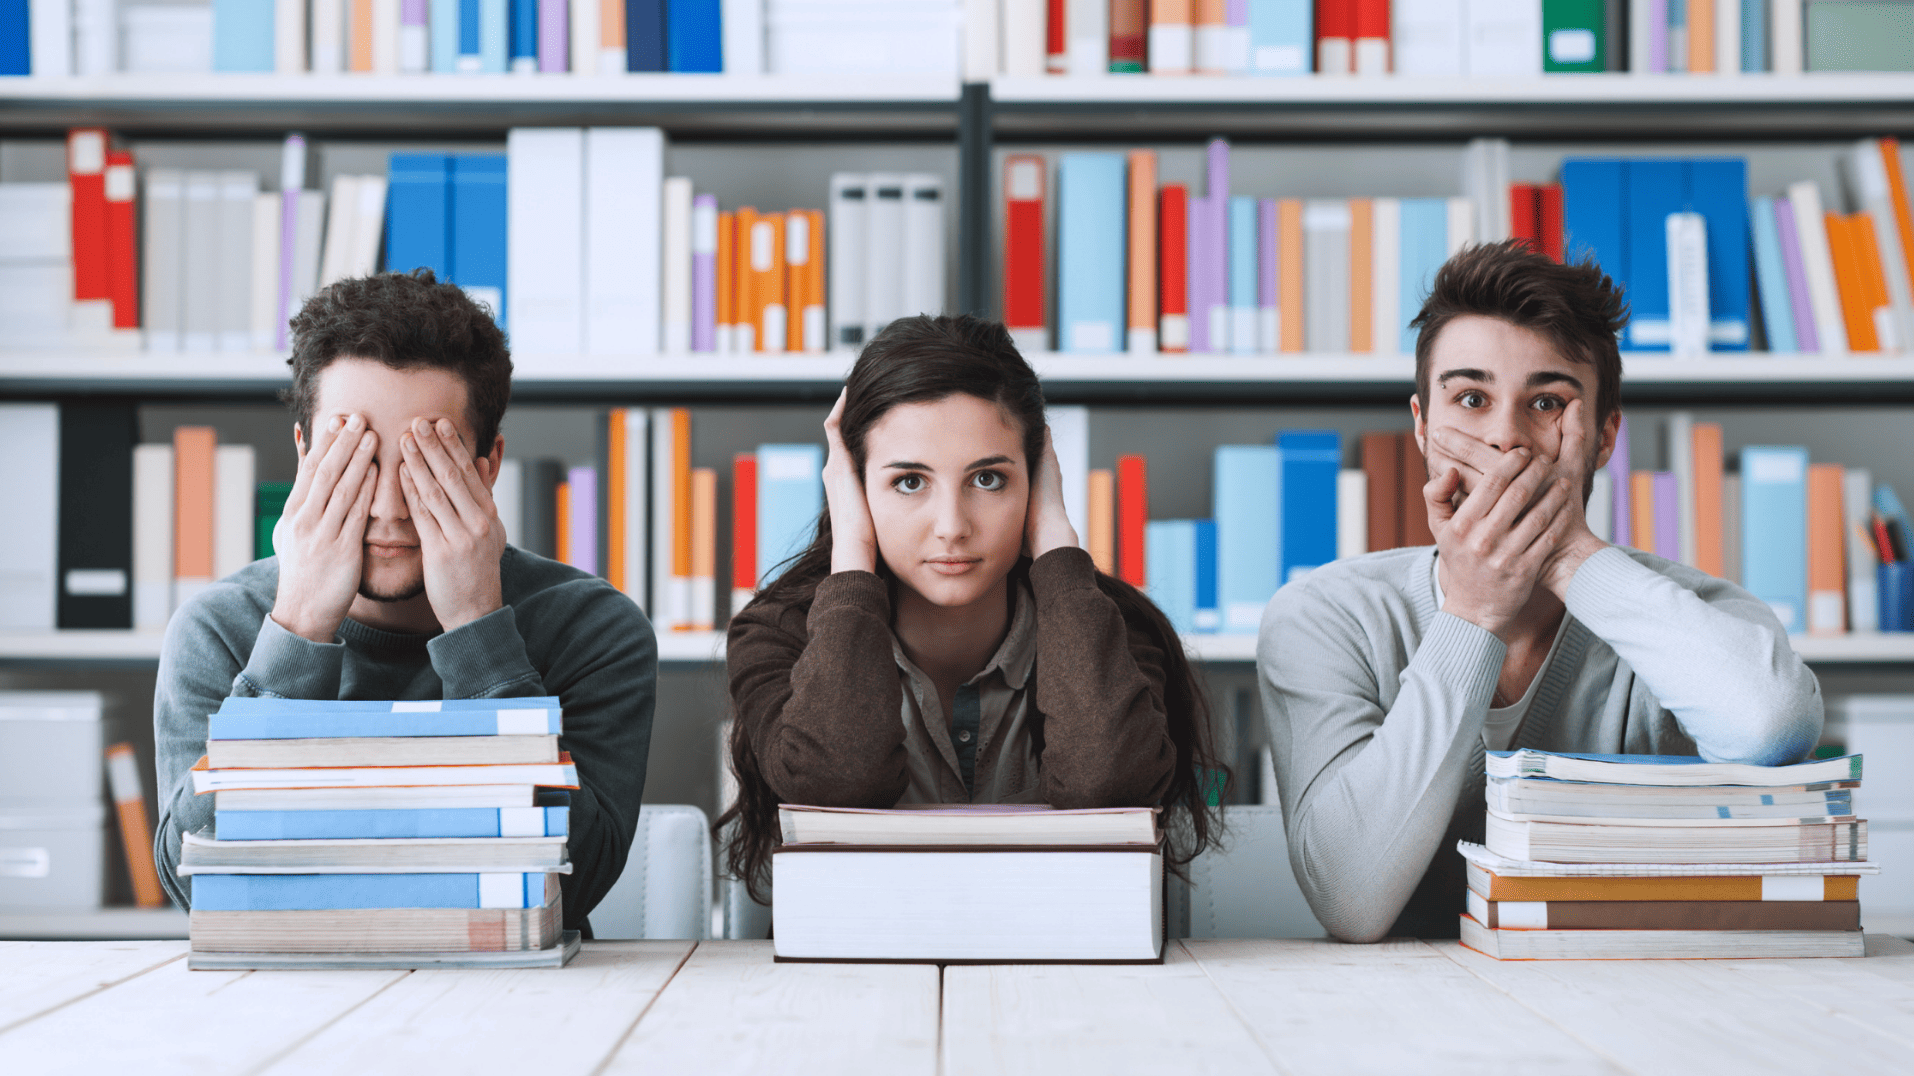 three people sitting in a library, one vovering their eyes, one covering their mouth, and one covering their ears